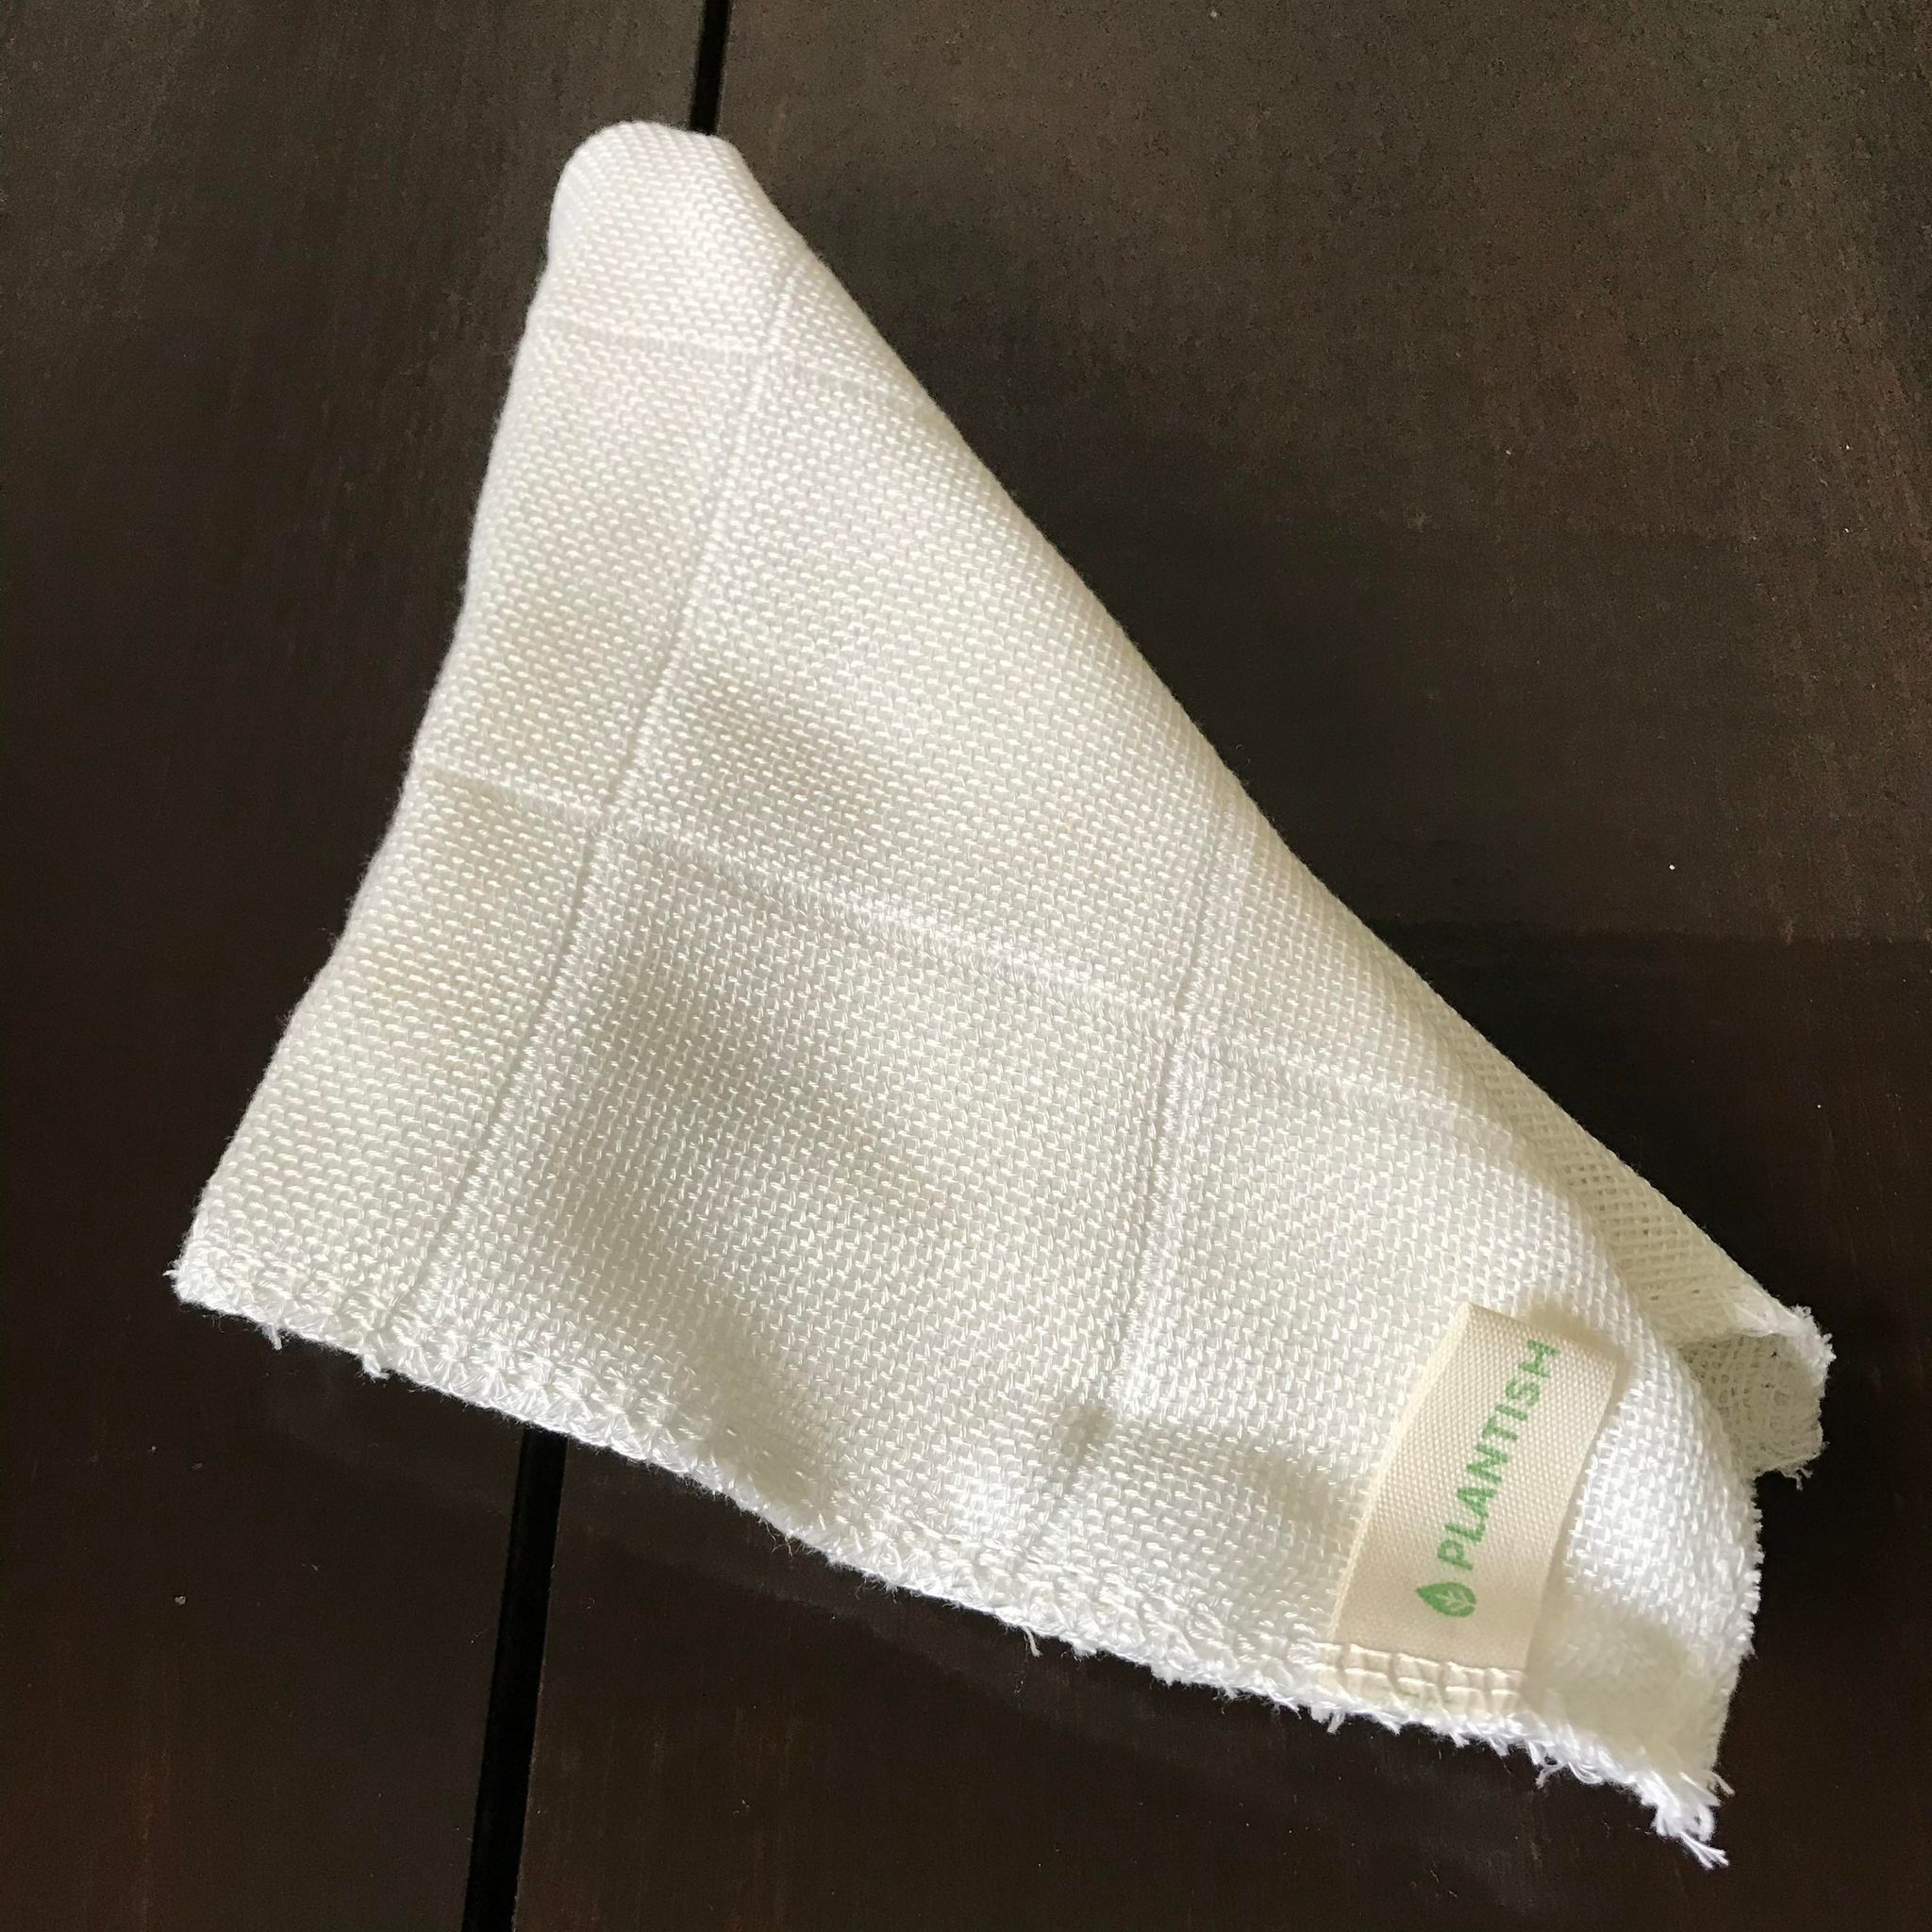 Individaul white compostable, antibacterial, oil-resistant and lint-free bamboo cloth made by Plantish